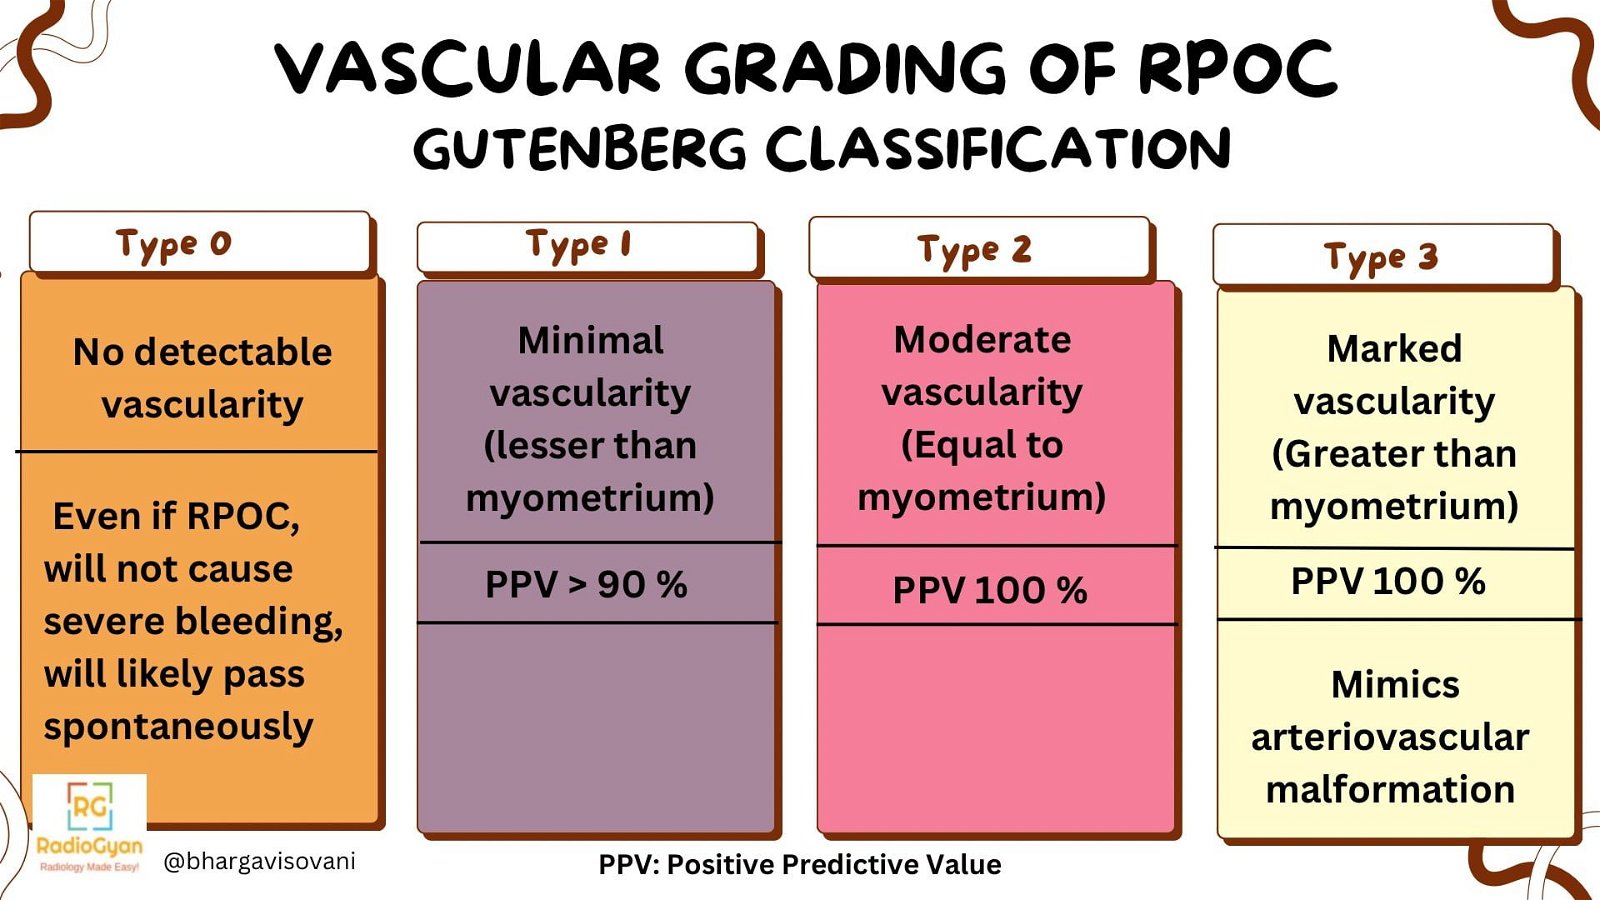 Vascular Grading of Retained Products of Conception